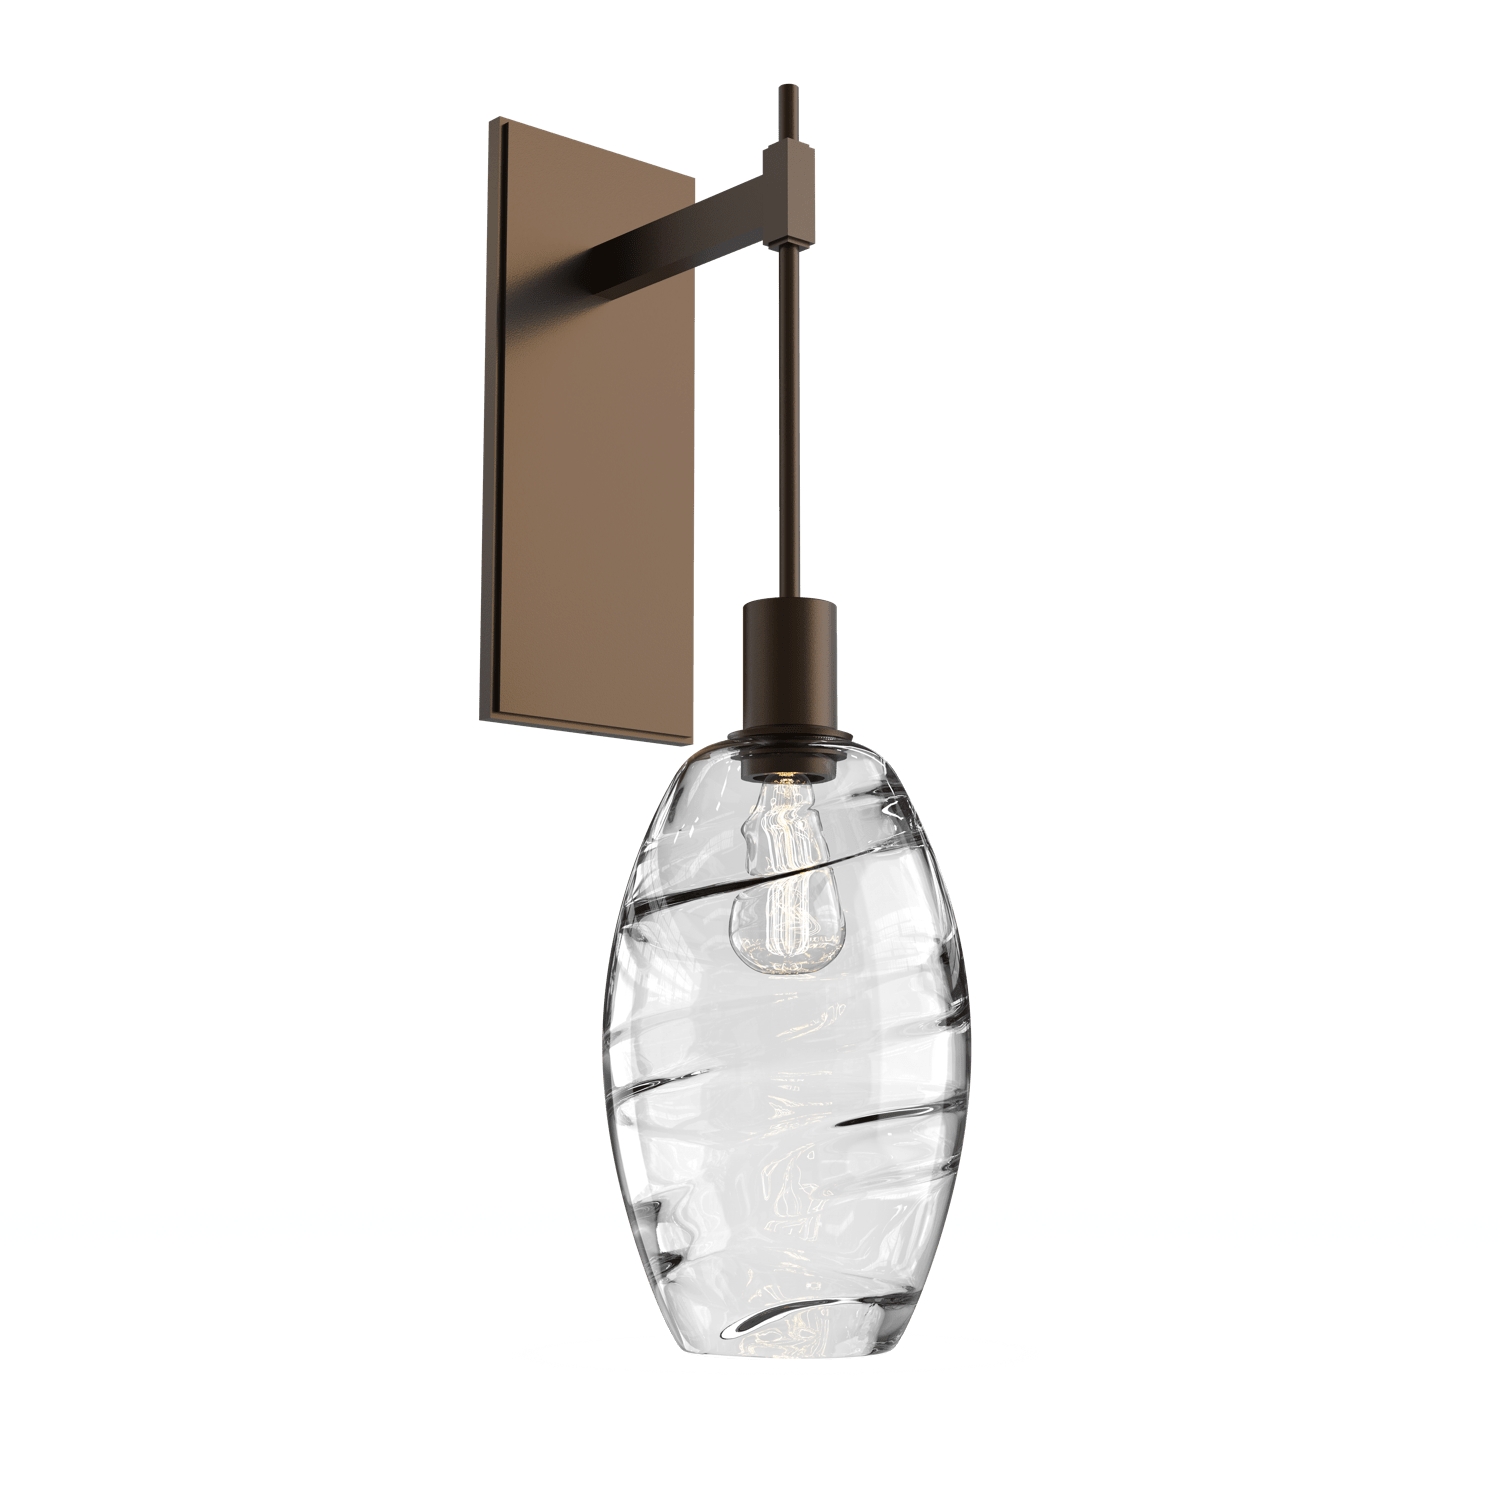 IDB0035-24-FB-OC-Hammerton-Studio-Optic-Blown-Glass-Elisse-tempo-wall-sconce-with-flat-bronze-finish-and-optic-clear-blown-glass-shades-and-incandescent-lamping